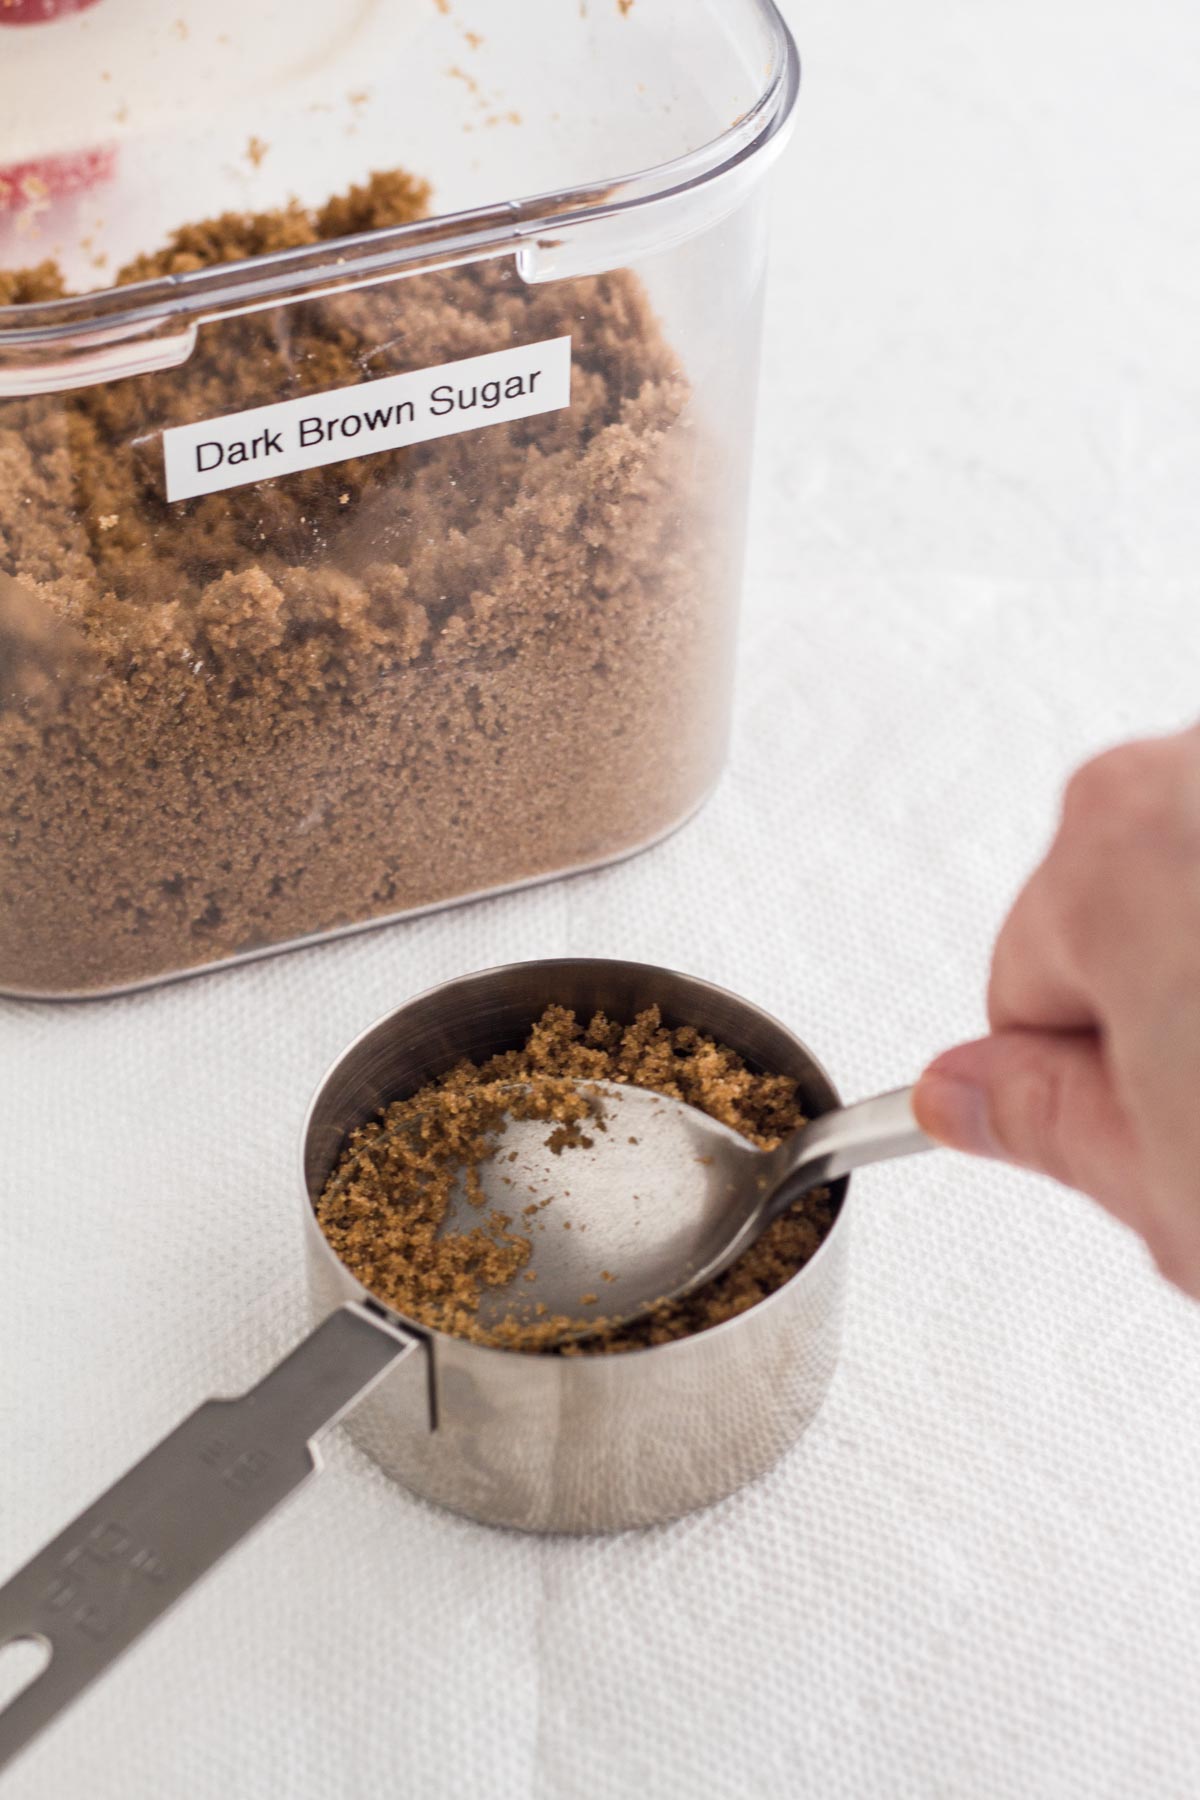 A hand pressing the back of a spoon into a measuring cup to pack down brown sugar.